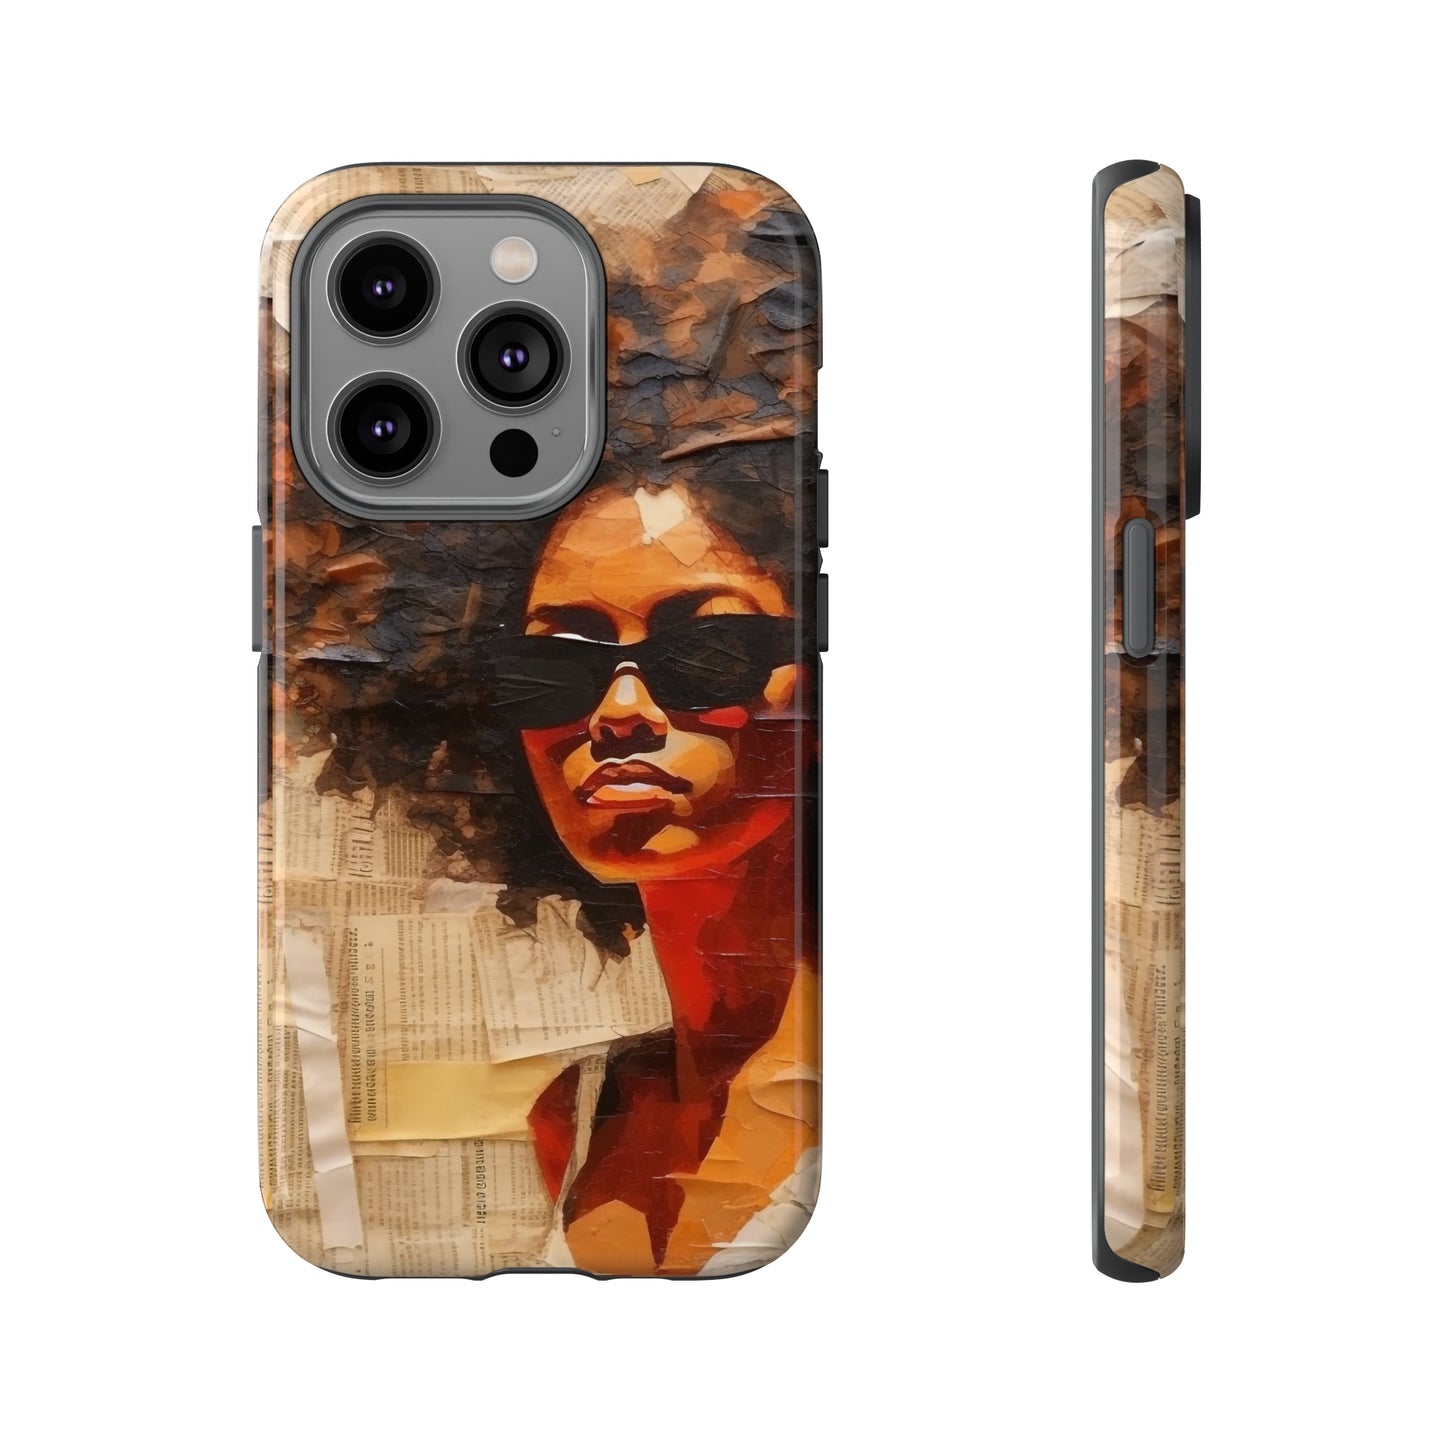 Afro Paper Collage Phone Case